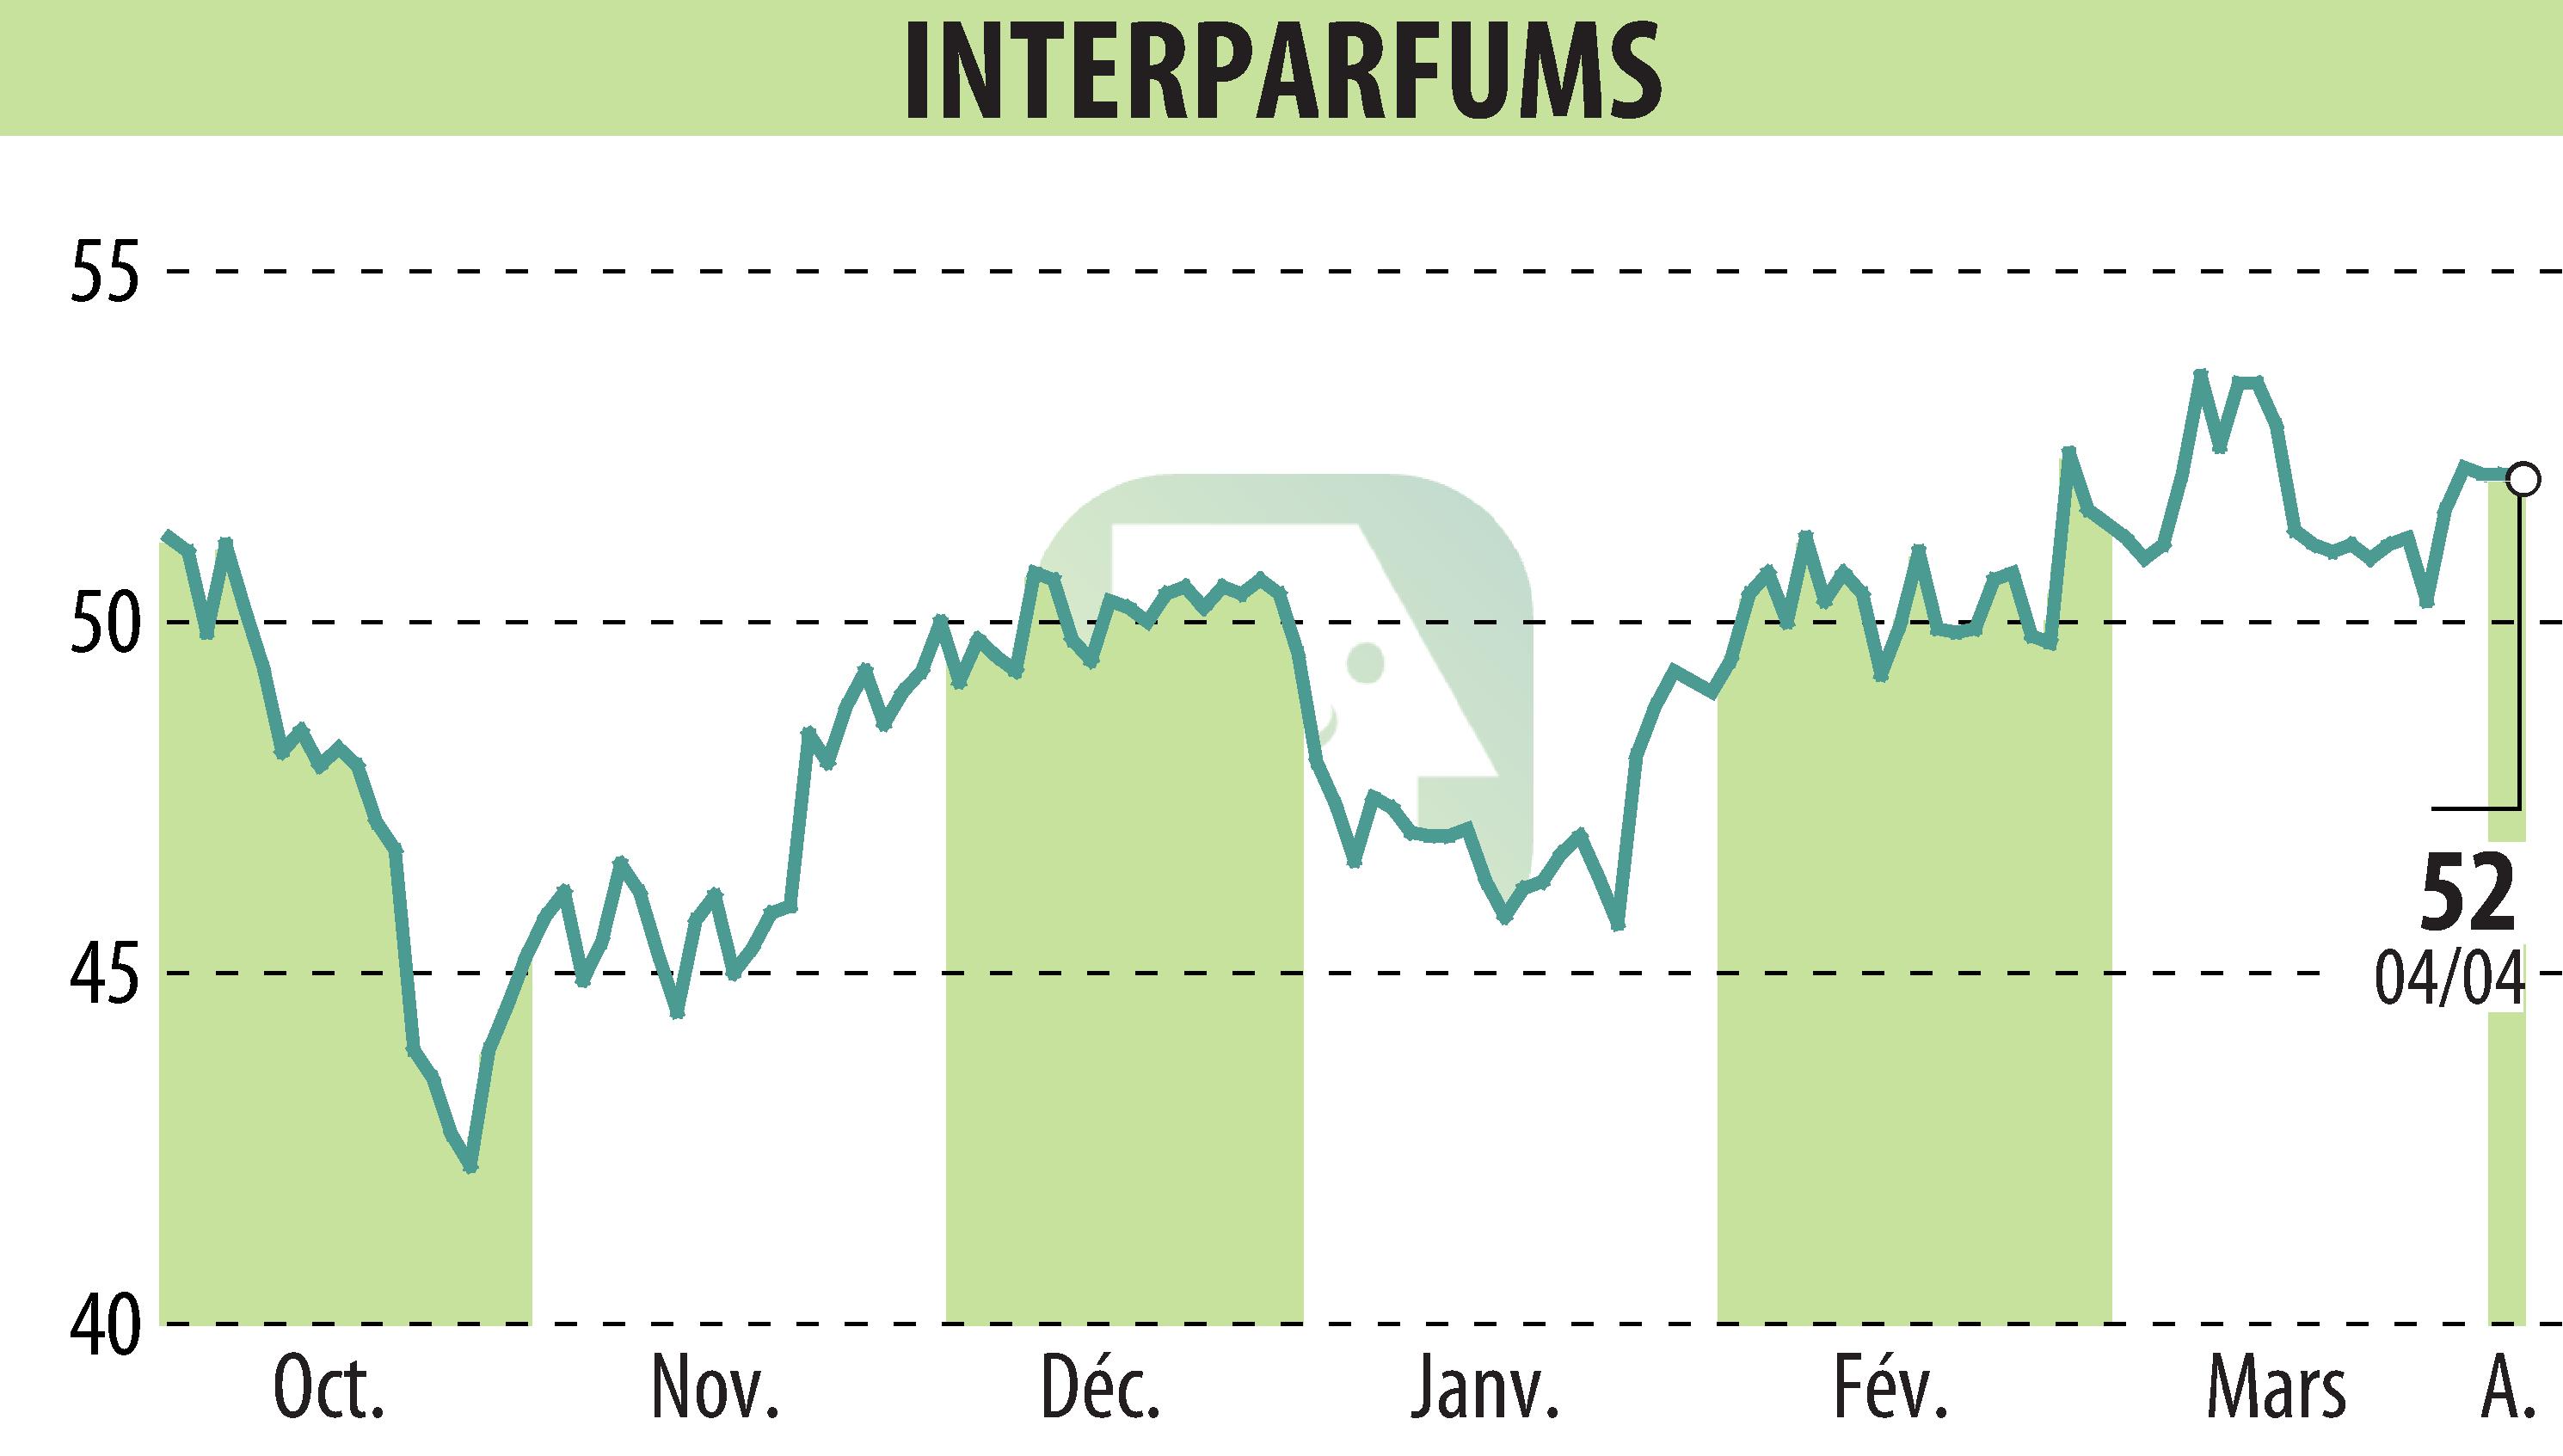 Stock price chart of INTER PARFUMS (EPA:ITP) showing fluctuations.